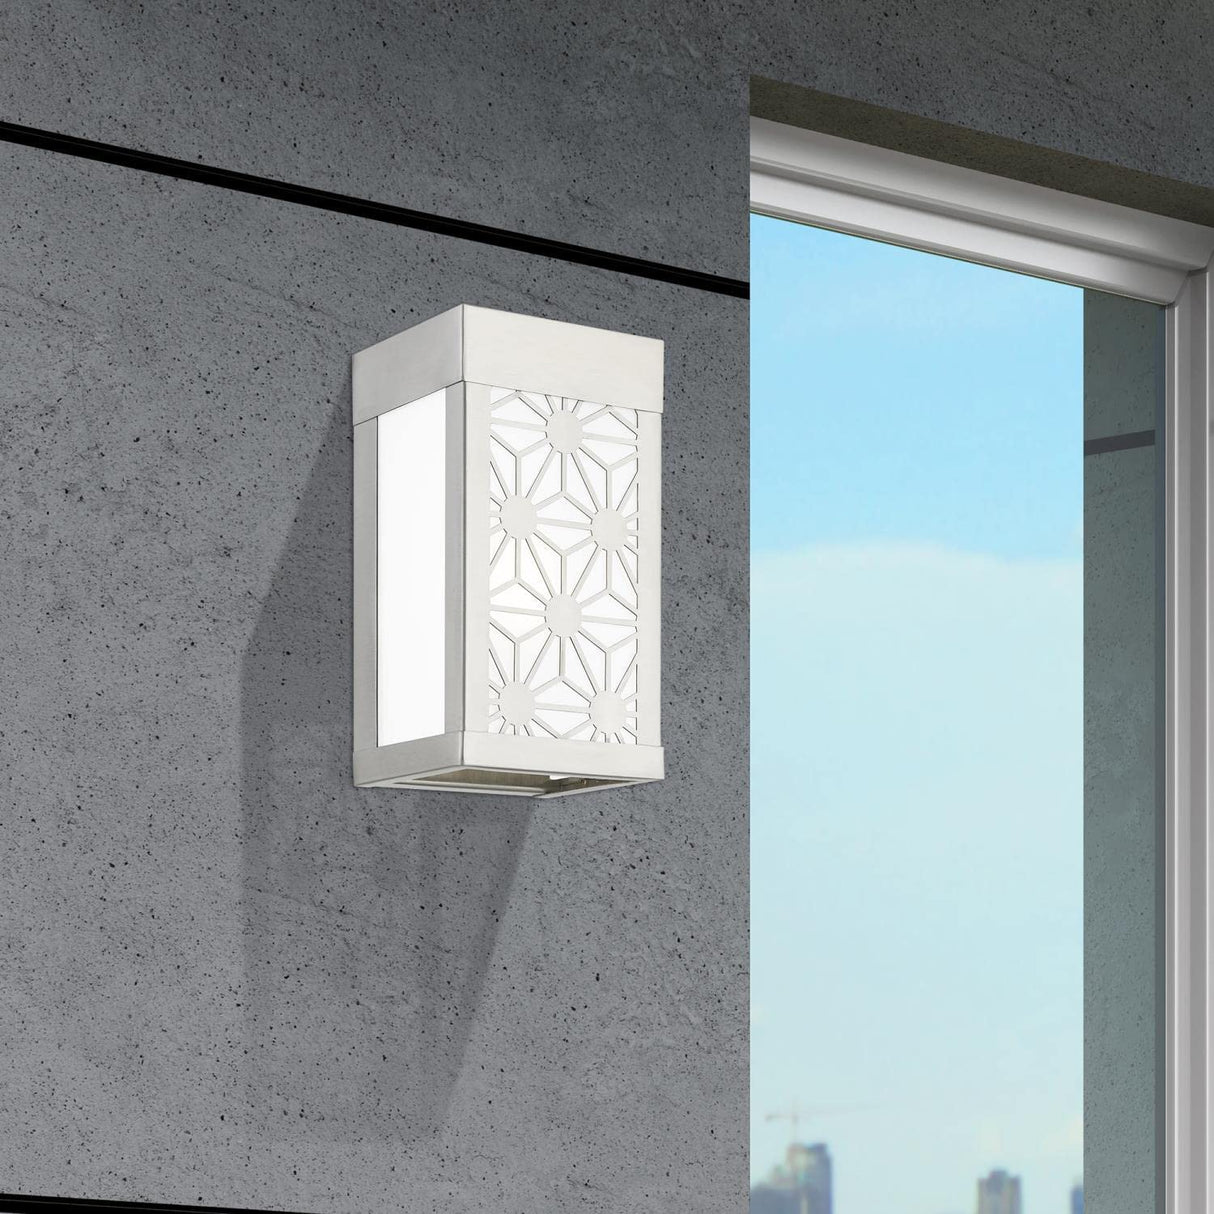 Livex Lighting 24321-91 Berkeley - 1 Light Small Outdoor ADA Wall Sconce in Nordic Style-8.5 Inches Tall and 4.5 Inches Wide, Finish Color: Brushed Nickel